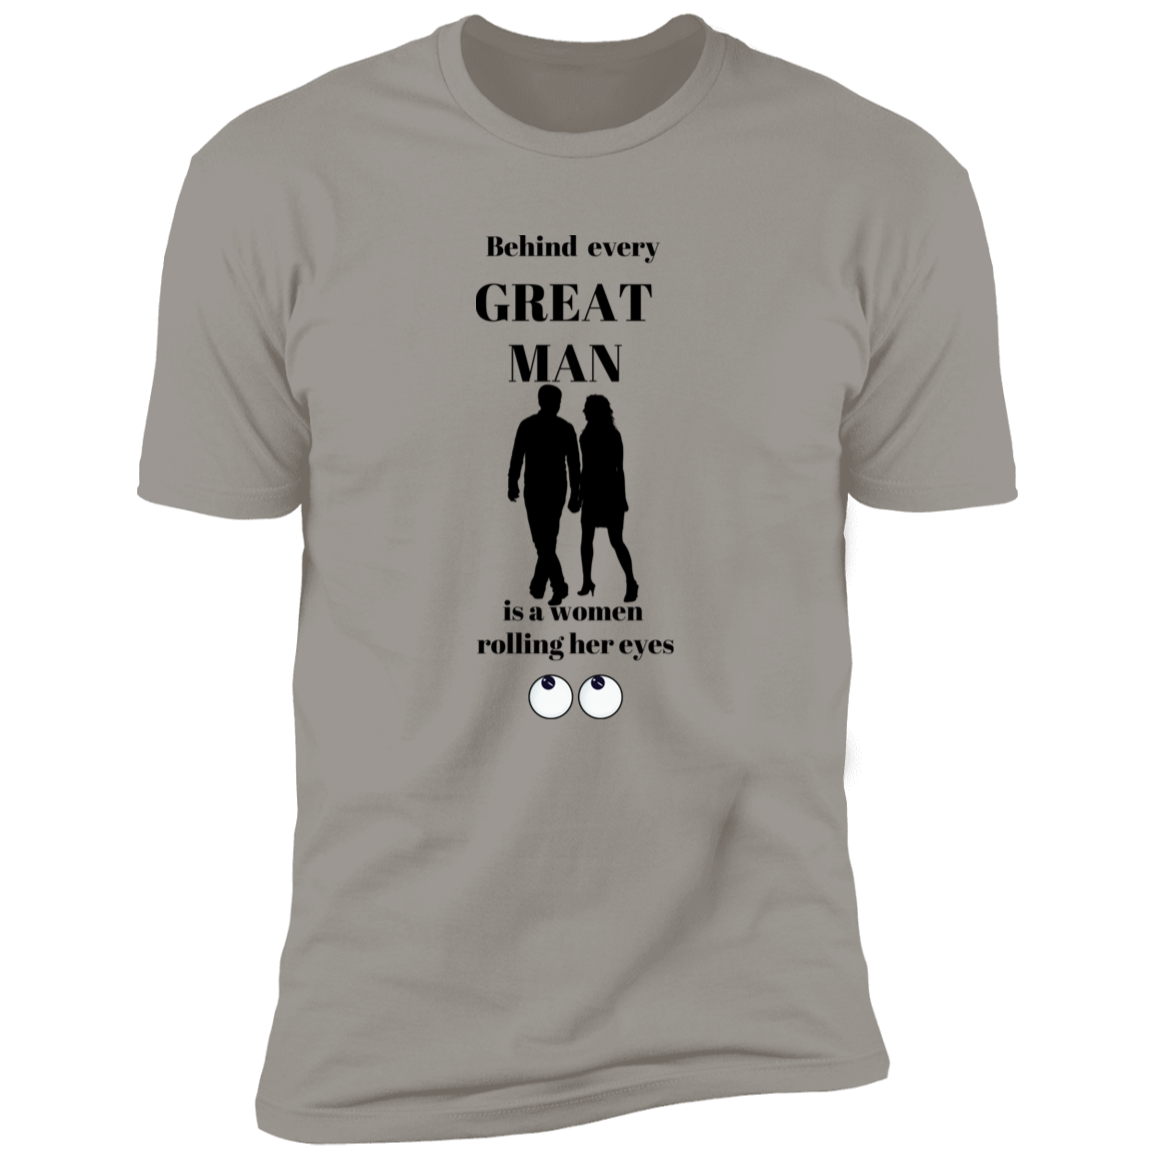 BEHIND EVERY GREAT MAN T-SHIRT